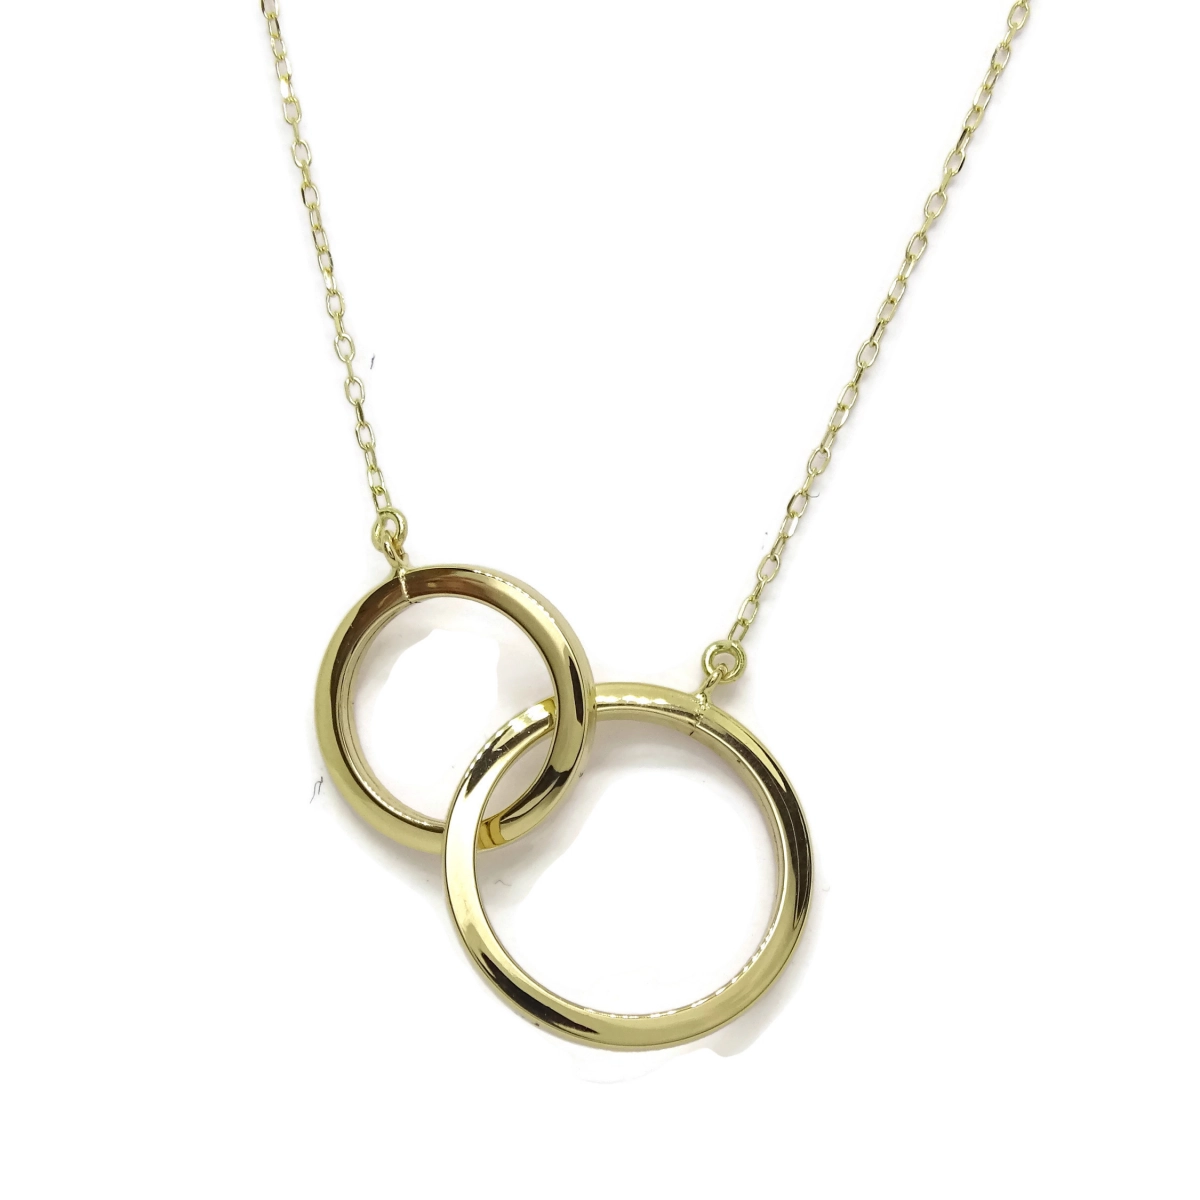 GOLD NECKLACE WITH 2 CIRCLES ALWAYS UNITED A CLASSIC REINVENTED. WITH CHAIN MINIFORZADA NEVER SAY NEVER